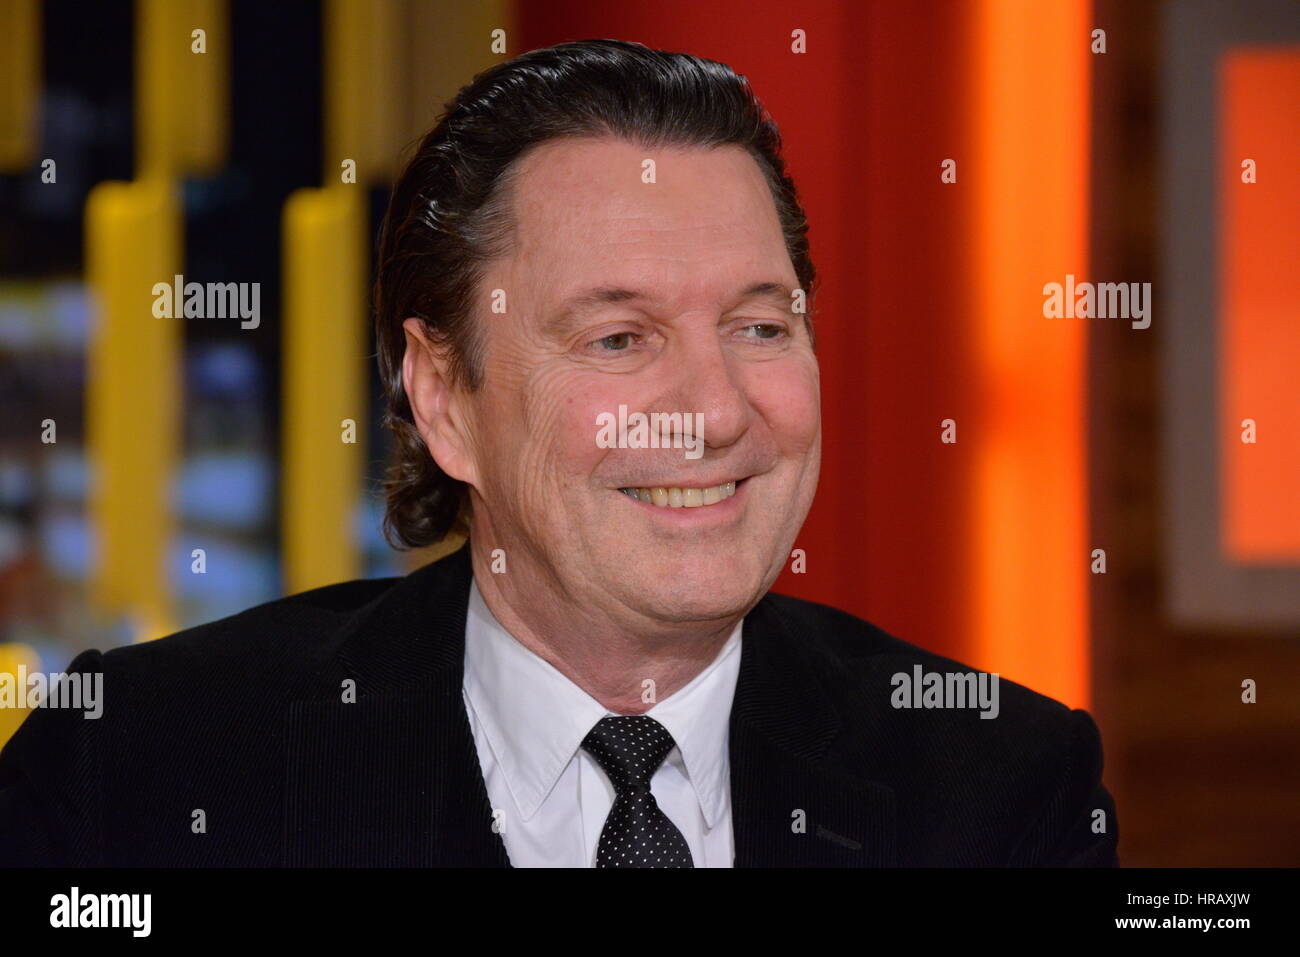 Berlin, Germany. 27th Feb, 2017. Swiss author Martin Suter, the mind behind numerous bestsellers, photographed during an appearance on a TV talkshow in Berlin, Germany, 27 February 2017. Photo: Karlheinz Schindler/dpa-Zentralbild/ZB/dpa/Alamy Live News Stock Photo